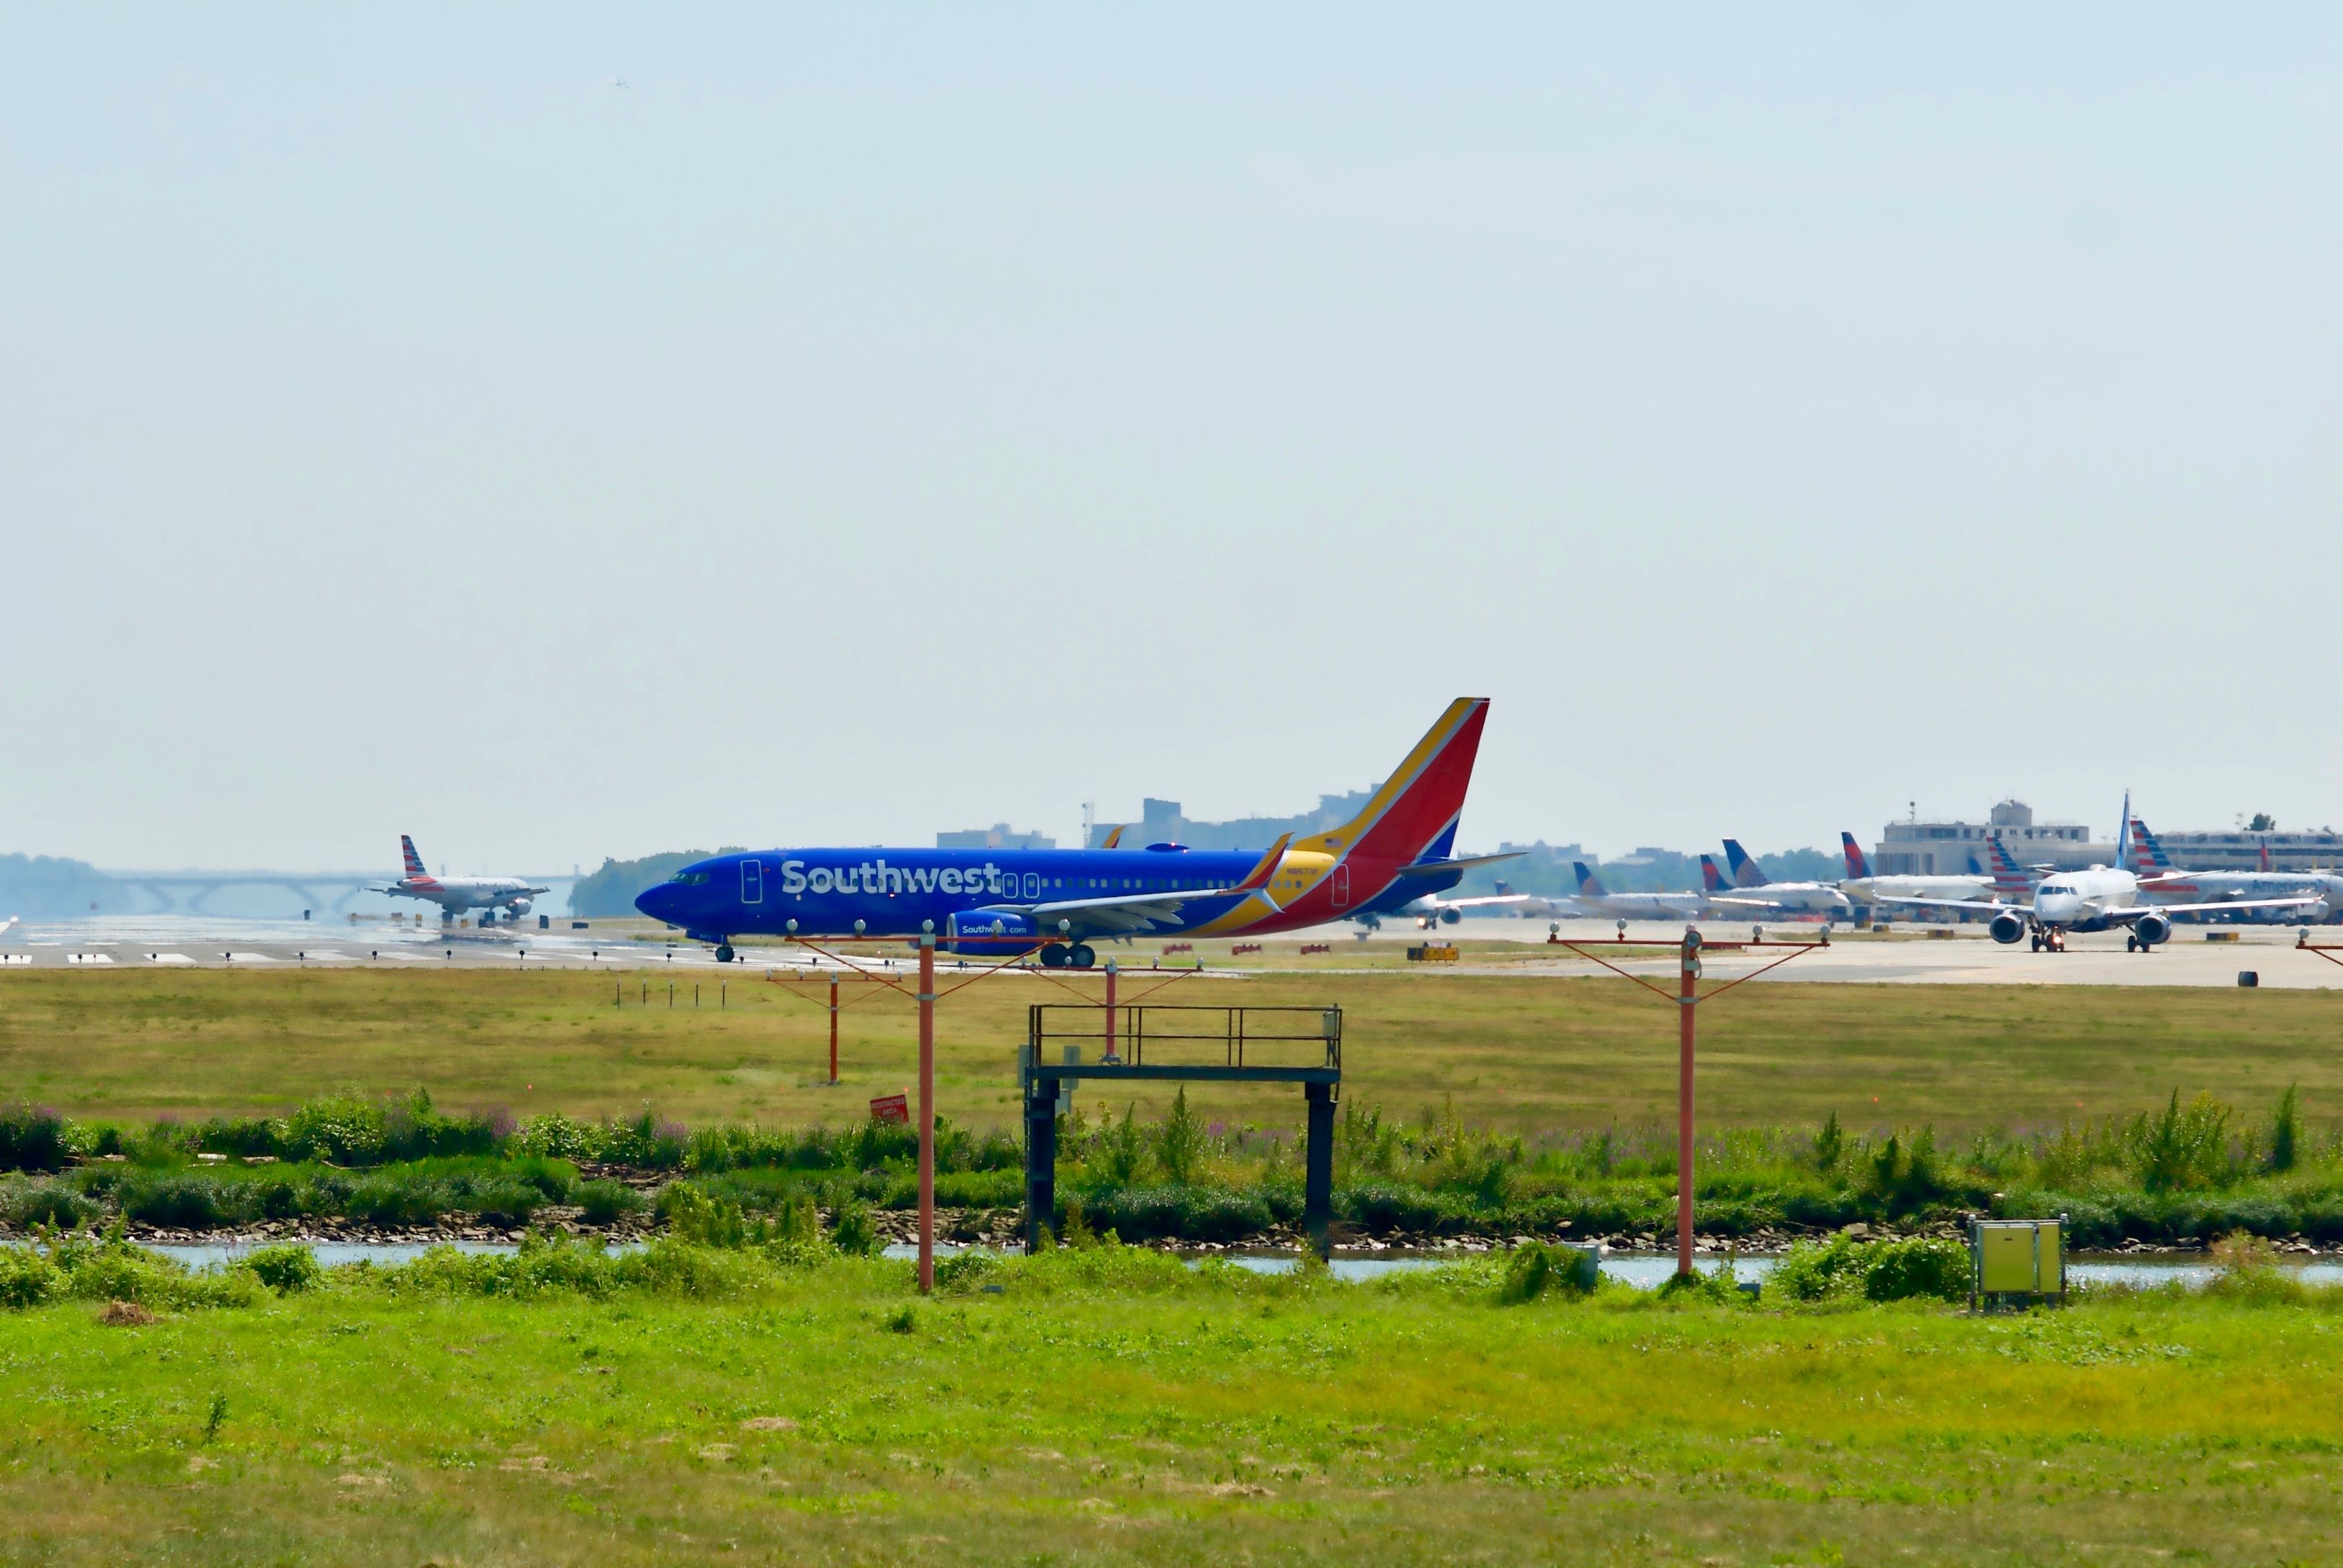 shutterstock_1538785259 - September 11, 2019: A Southwest Airlines Boeing 737 aircraft turns onto the runway in preparation for taking off from Ronald Reagan Washington National Airport (DCA).